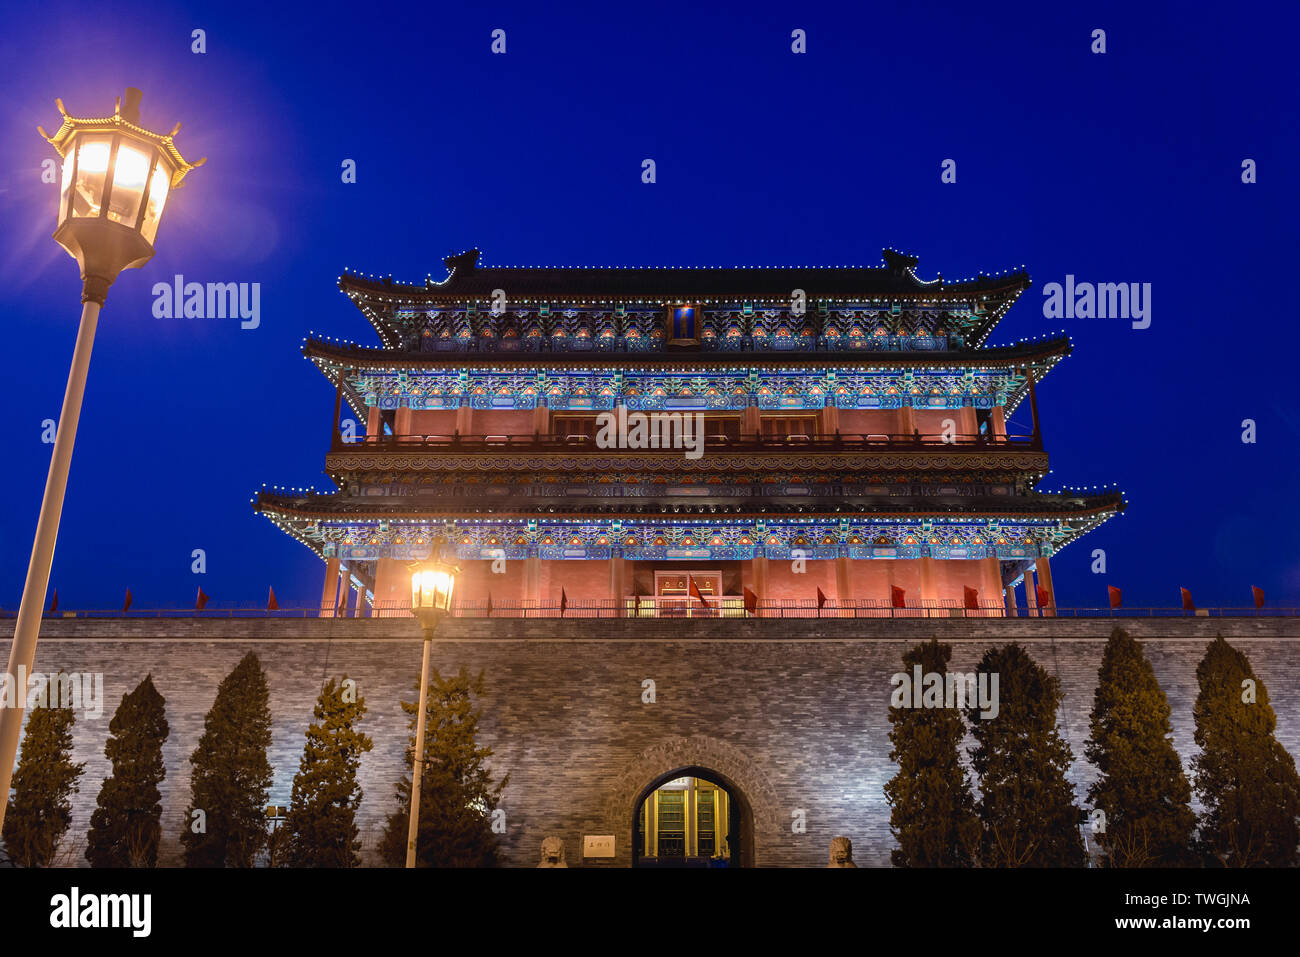 Evening view on Zhengyangmen gate house - part of the ancient city walls in Beijing, capital city of China Stock Photo